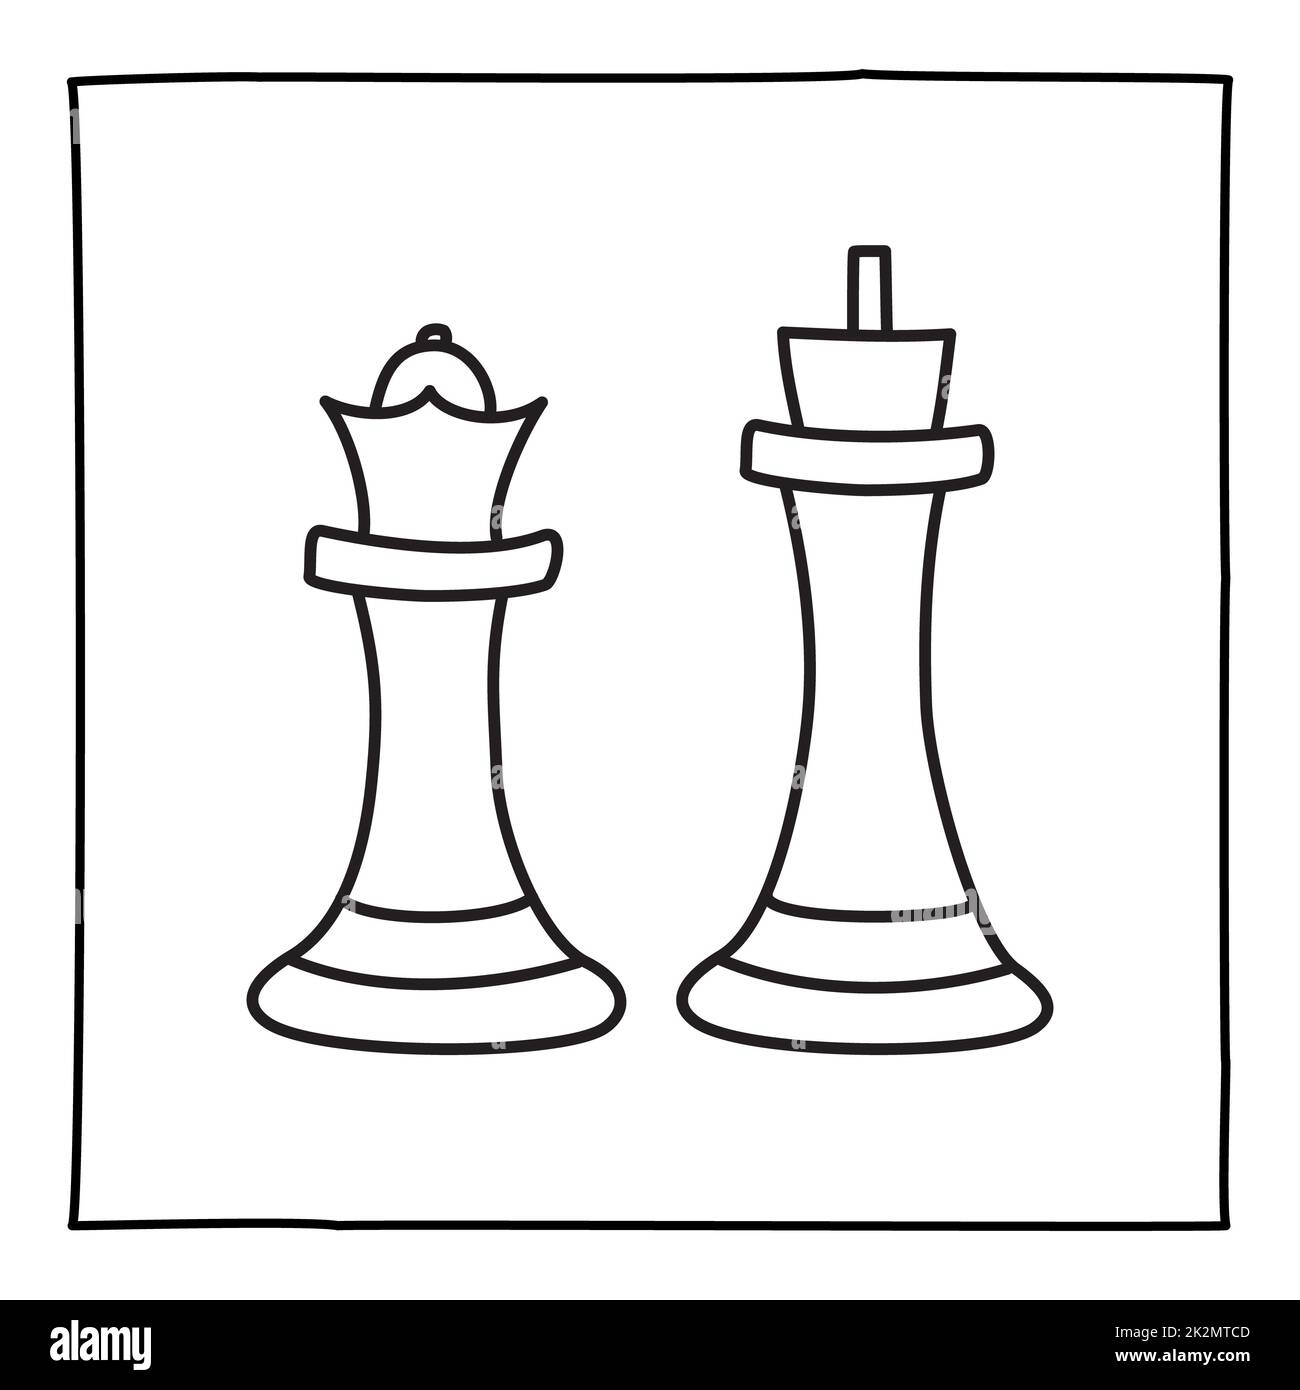 7+ Thousand Chess Pieces Drawing Royalty-Free Images, Stock Photos